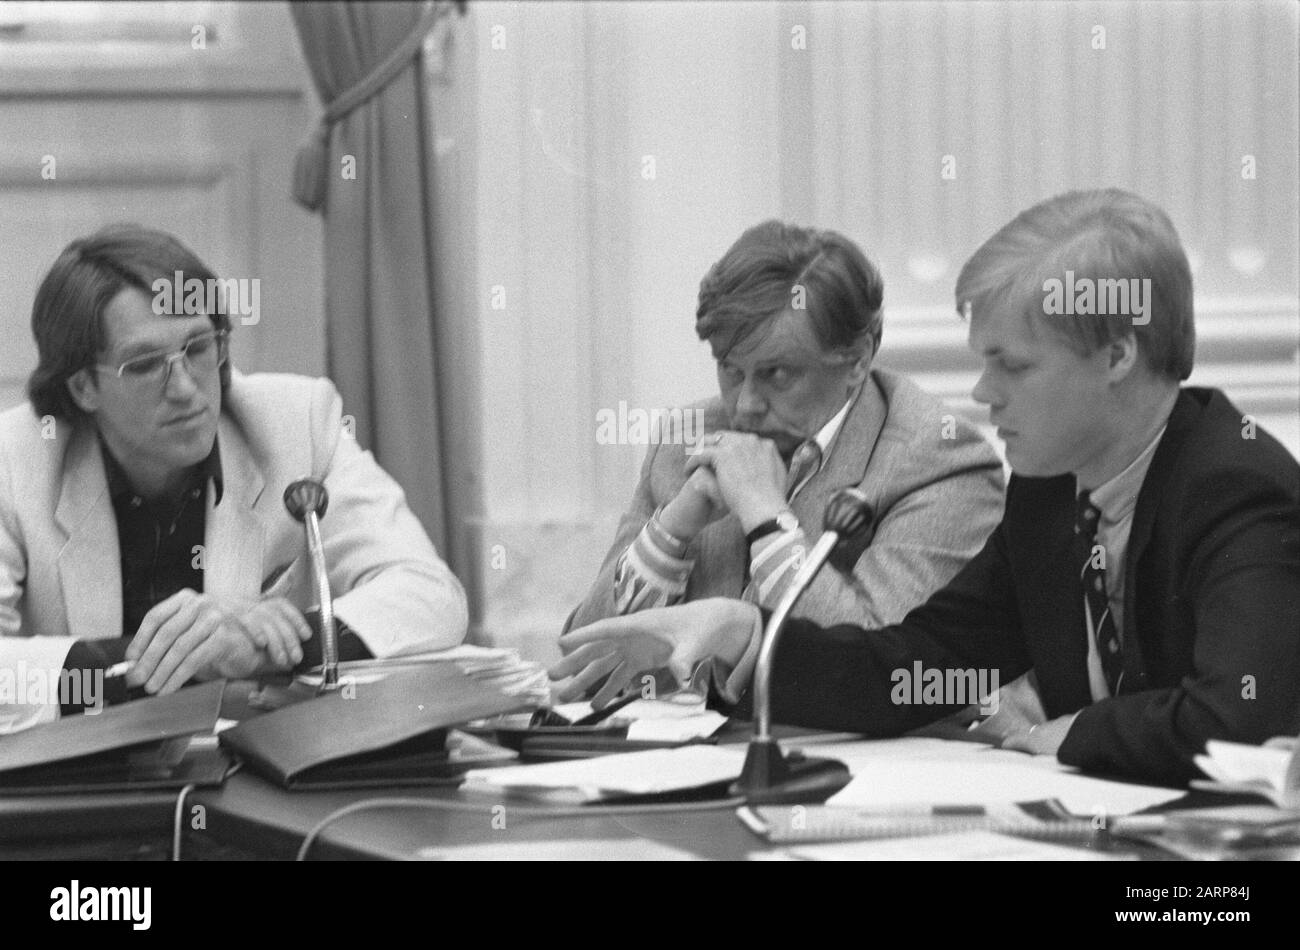 Special committee against fraud meeting in the House of Representatives on the report Abuse and Improper Use in the field of Taxation (ISMO), on combating fraud with social benefits  V.L.N.R. Kombrink, mrs. Dales and Mr. Linschoten Date: 13 June 1983 Location: The Hague, Zuid-Holland Keywords: taxes, fraud, parliamentary debates, parliamentarians, social security Personal name: Dales, Ien, Kombrink, Hans, Linschoten, Robin Stock Photo